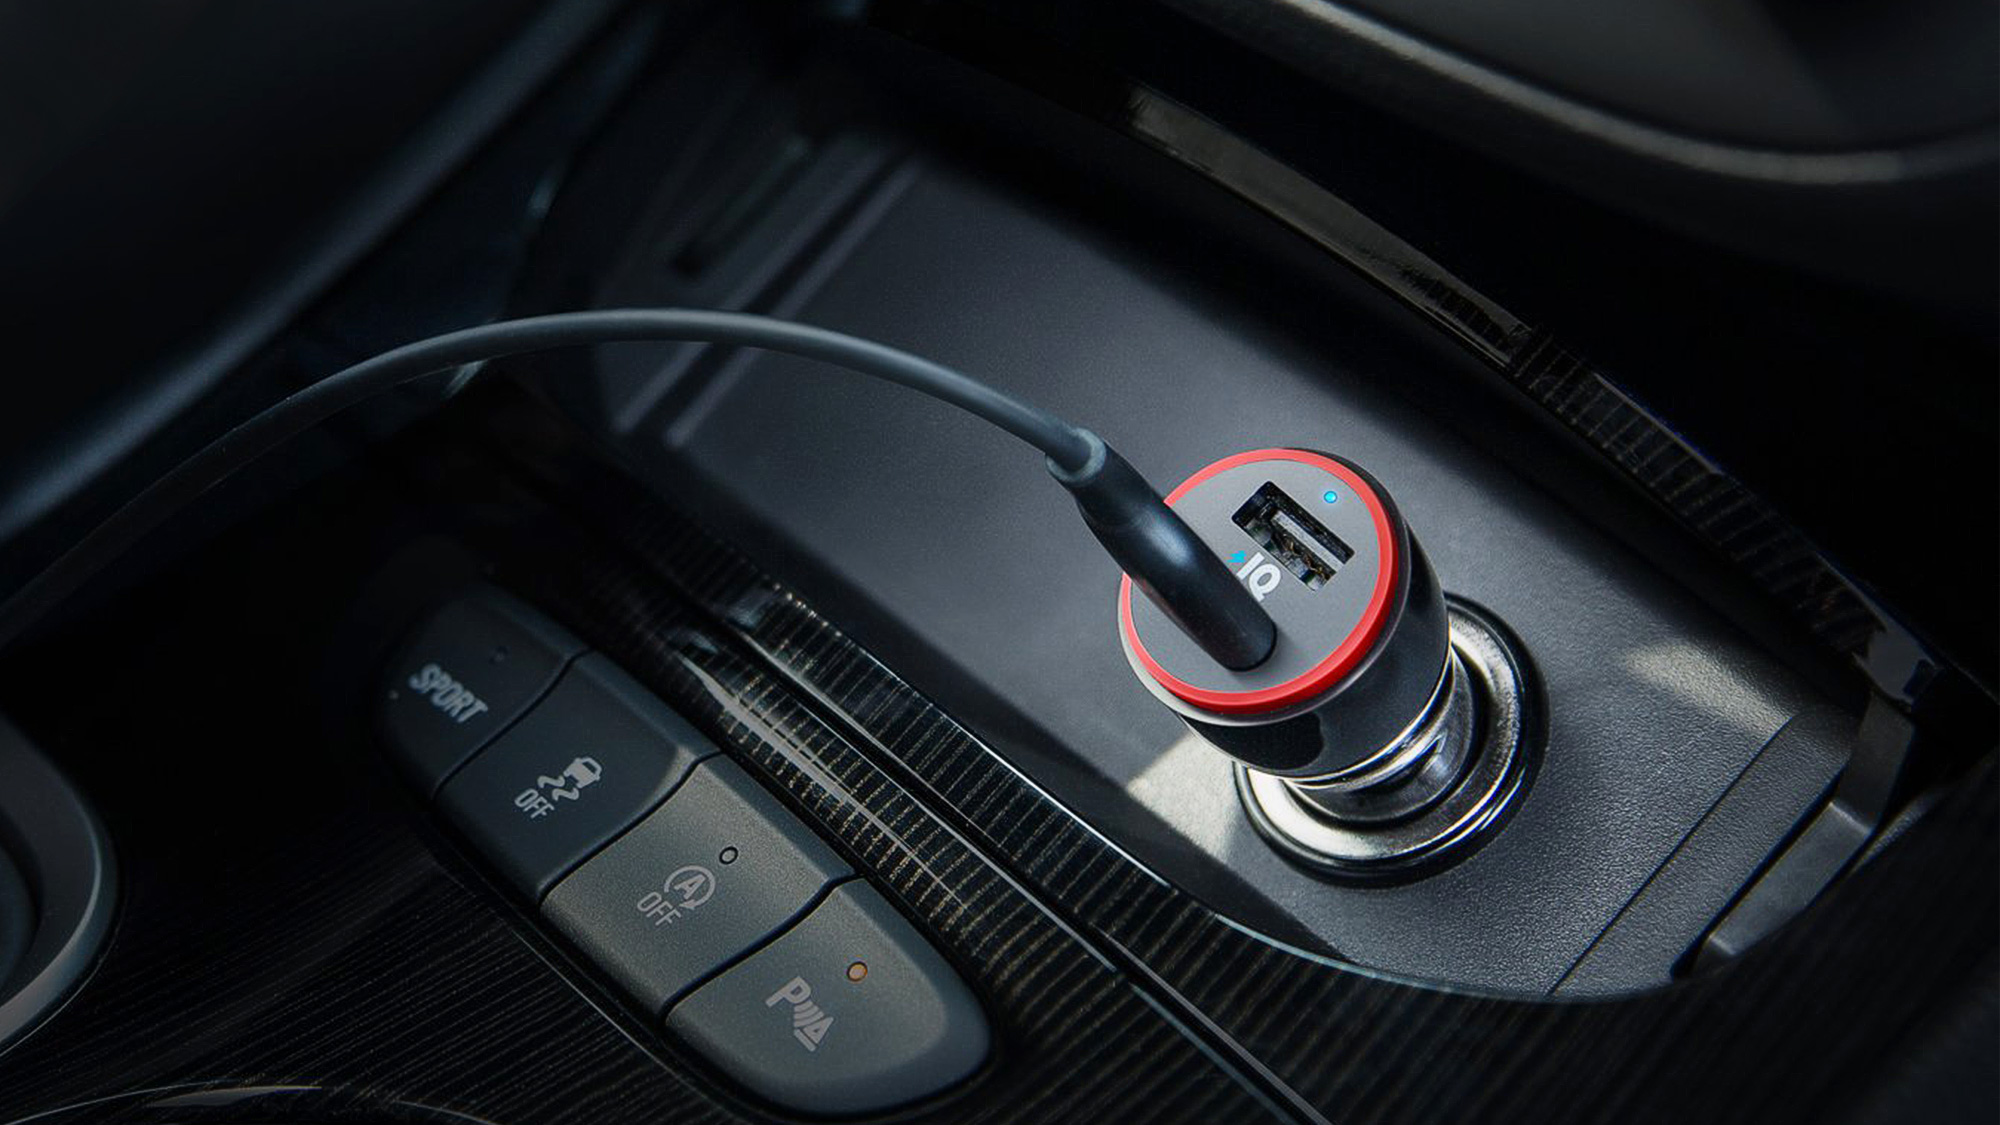 Anker dual-USB car charger